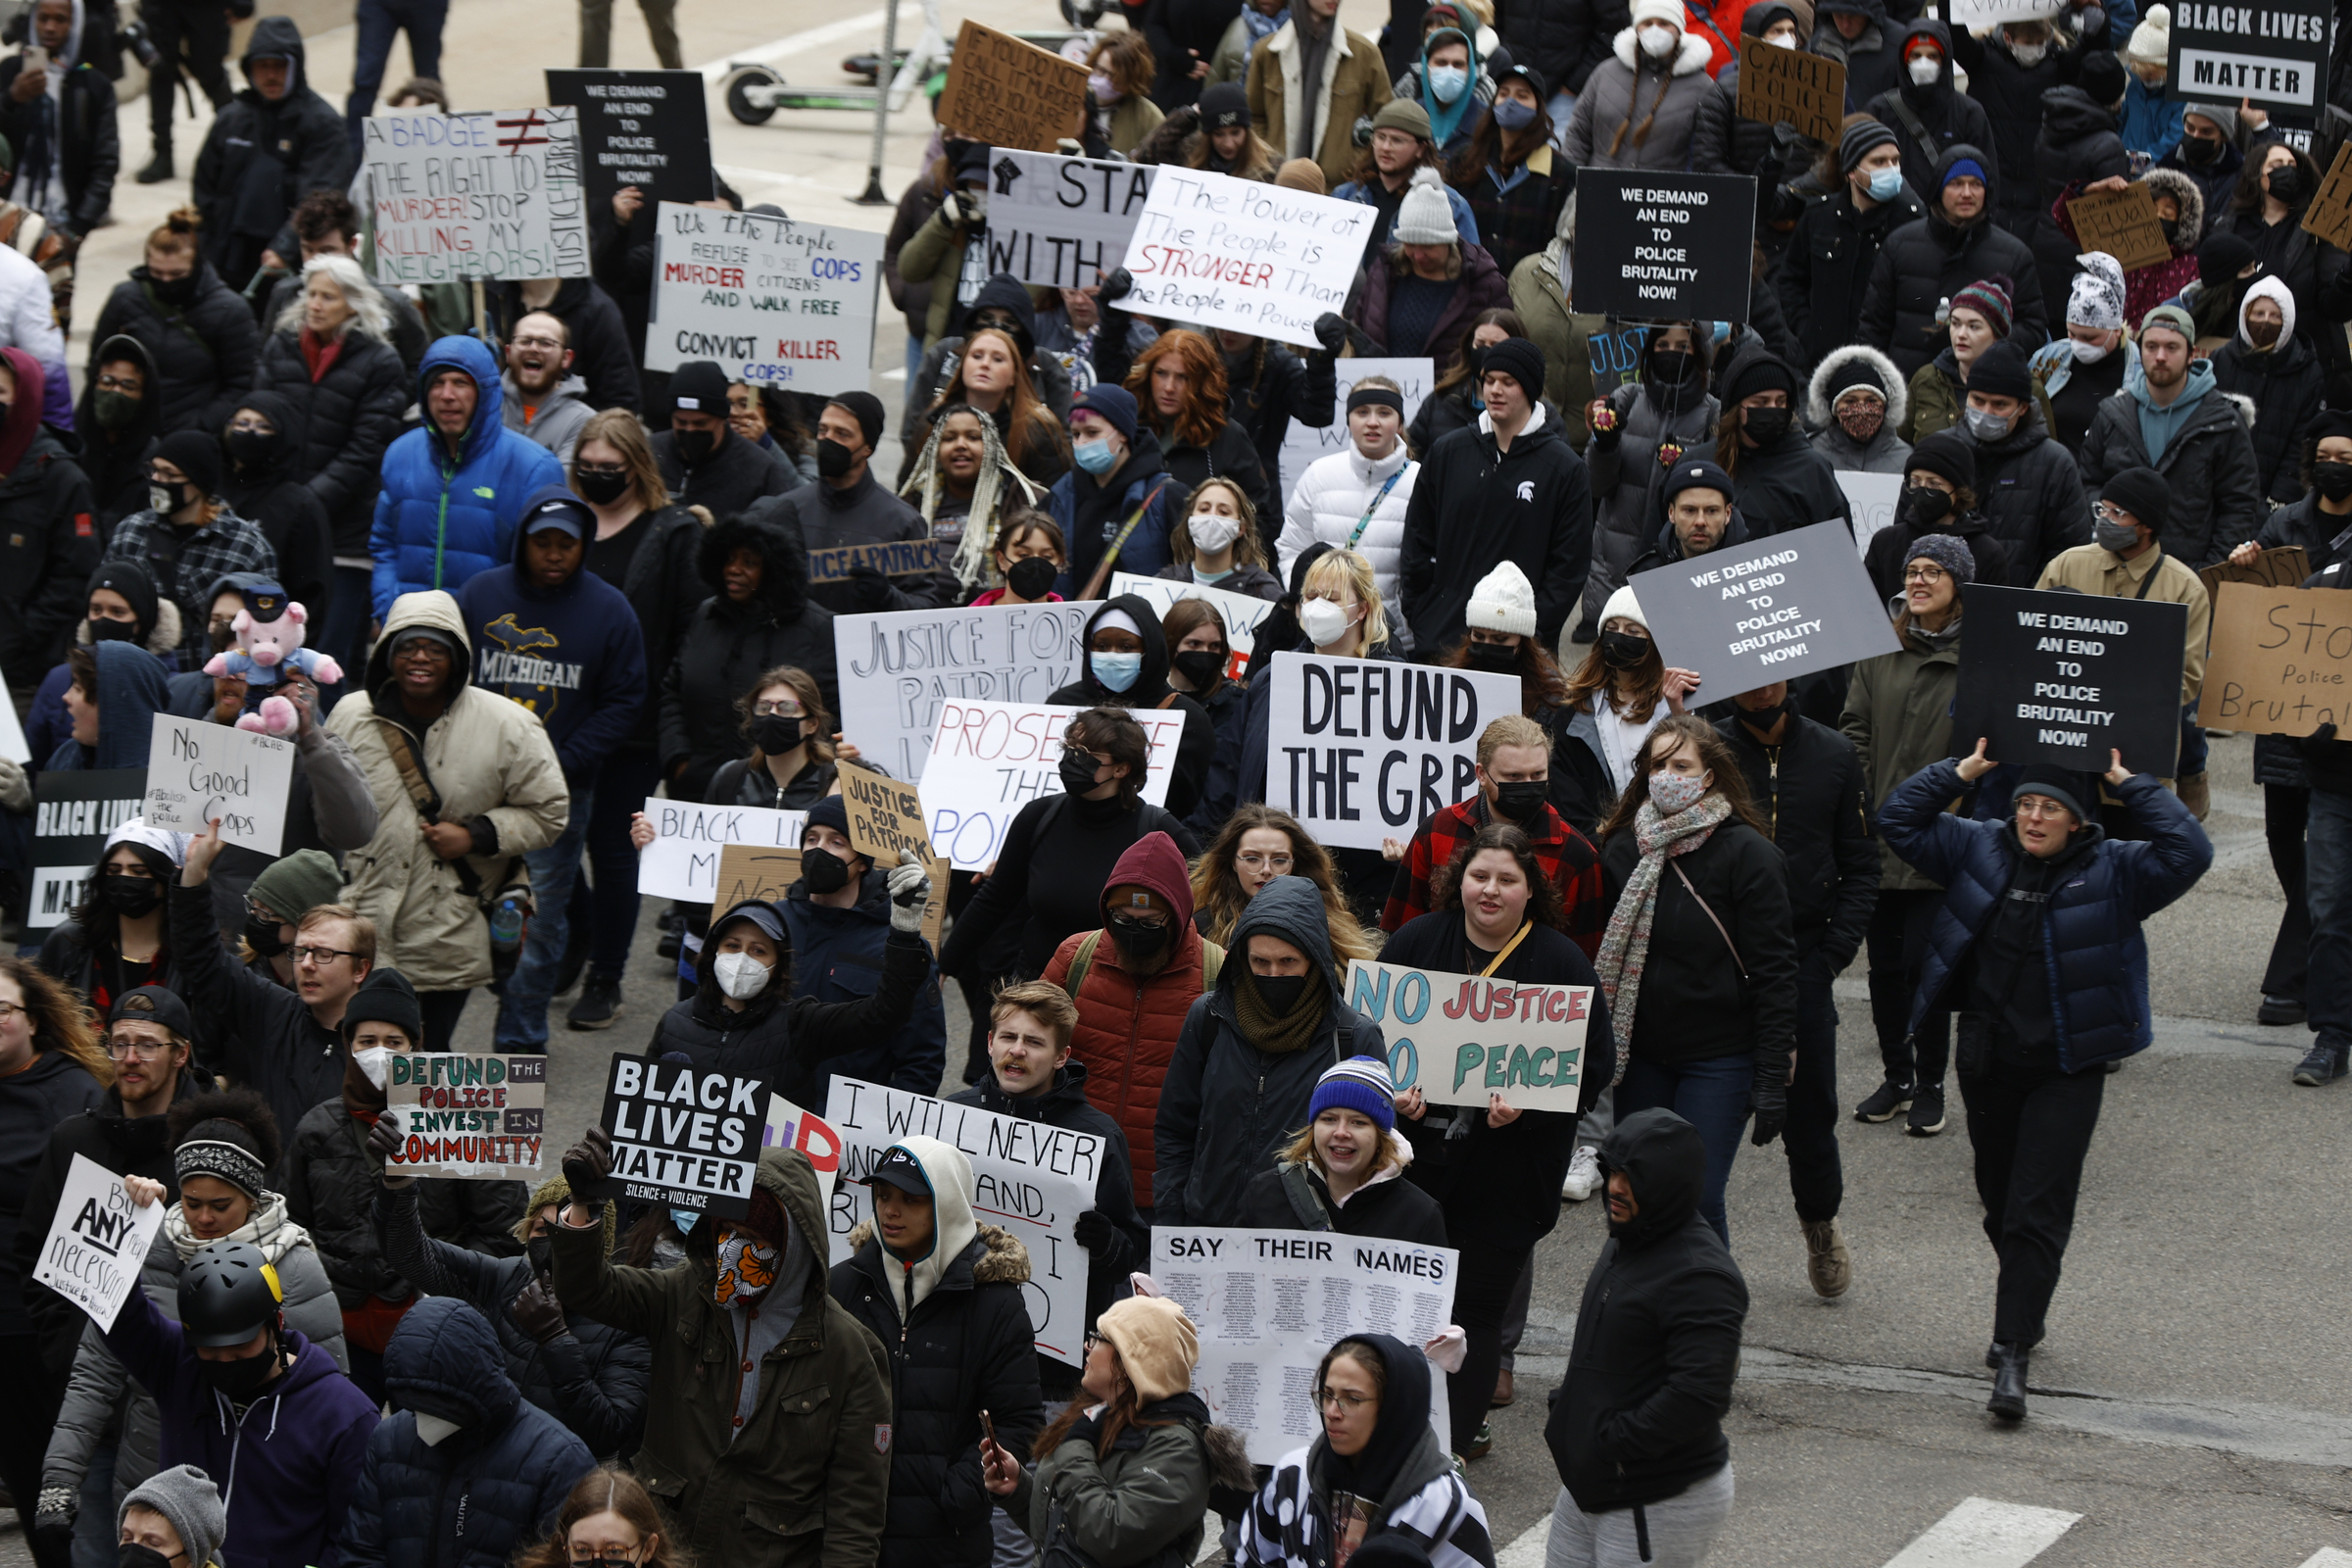 A crowd of over 300 people protest the killing of Patrick Lyoya in Grand Rapids, Mich., April 16, 2...